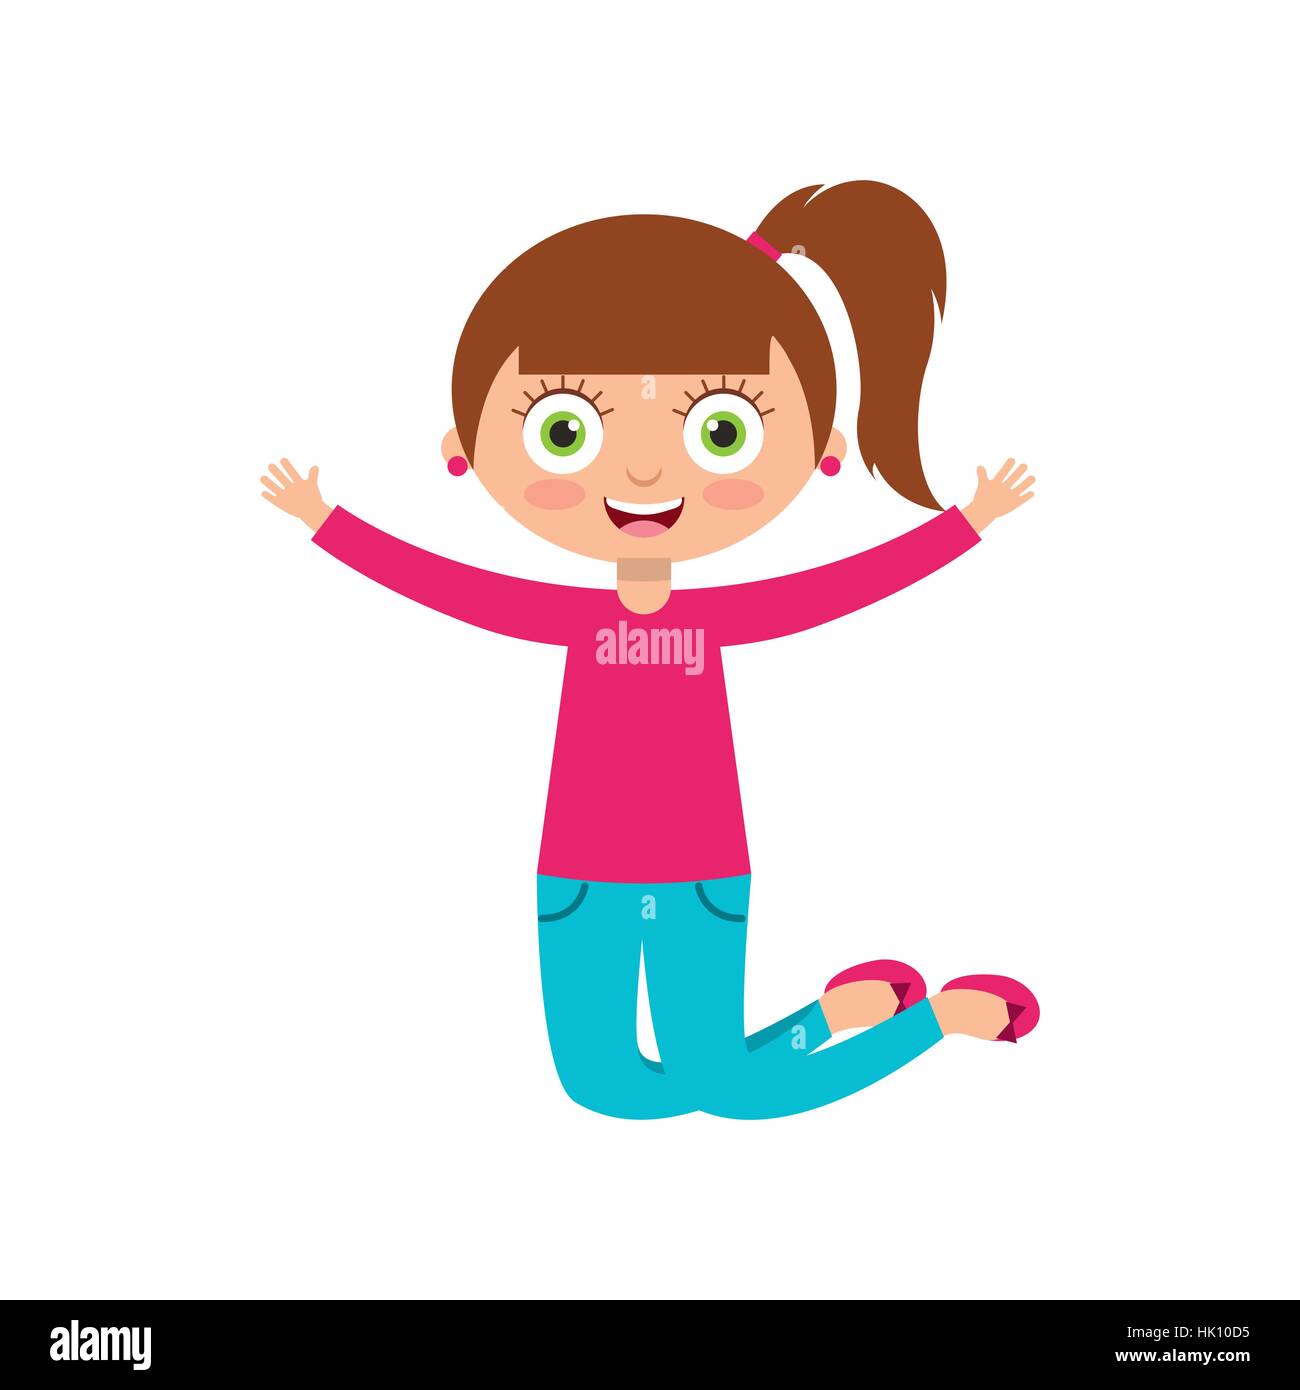 Cute Happy Girl Wearing Pink Shirt And Blue Jeans Over White Background Colorful Design Vector Illustration Stock Vector Image Art Alamy